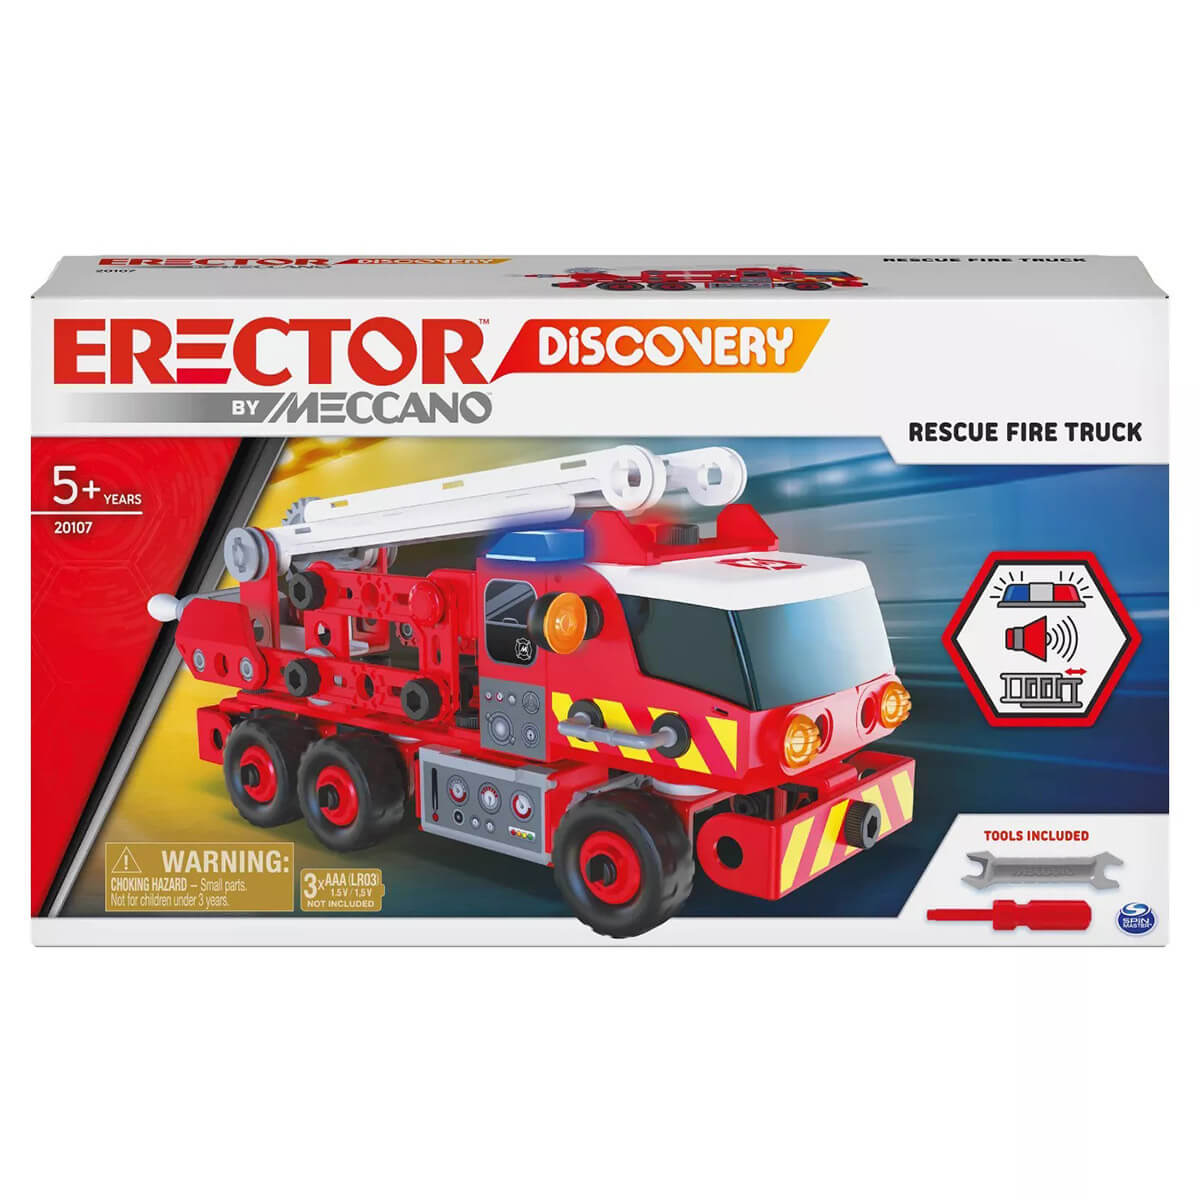 Erector by Meccano Discovery Rescue Fire Truck Lights and Sounds STEAM Building Kit